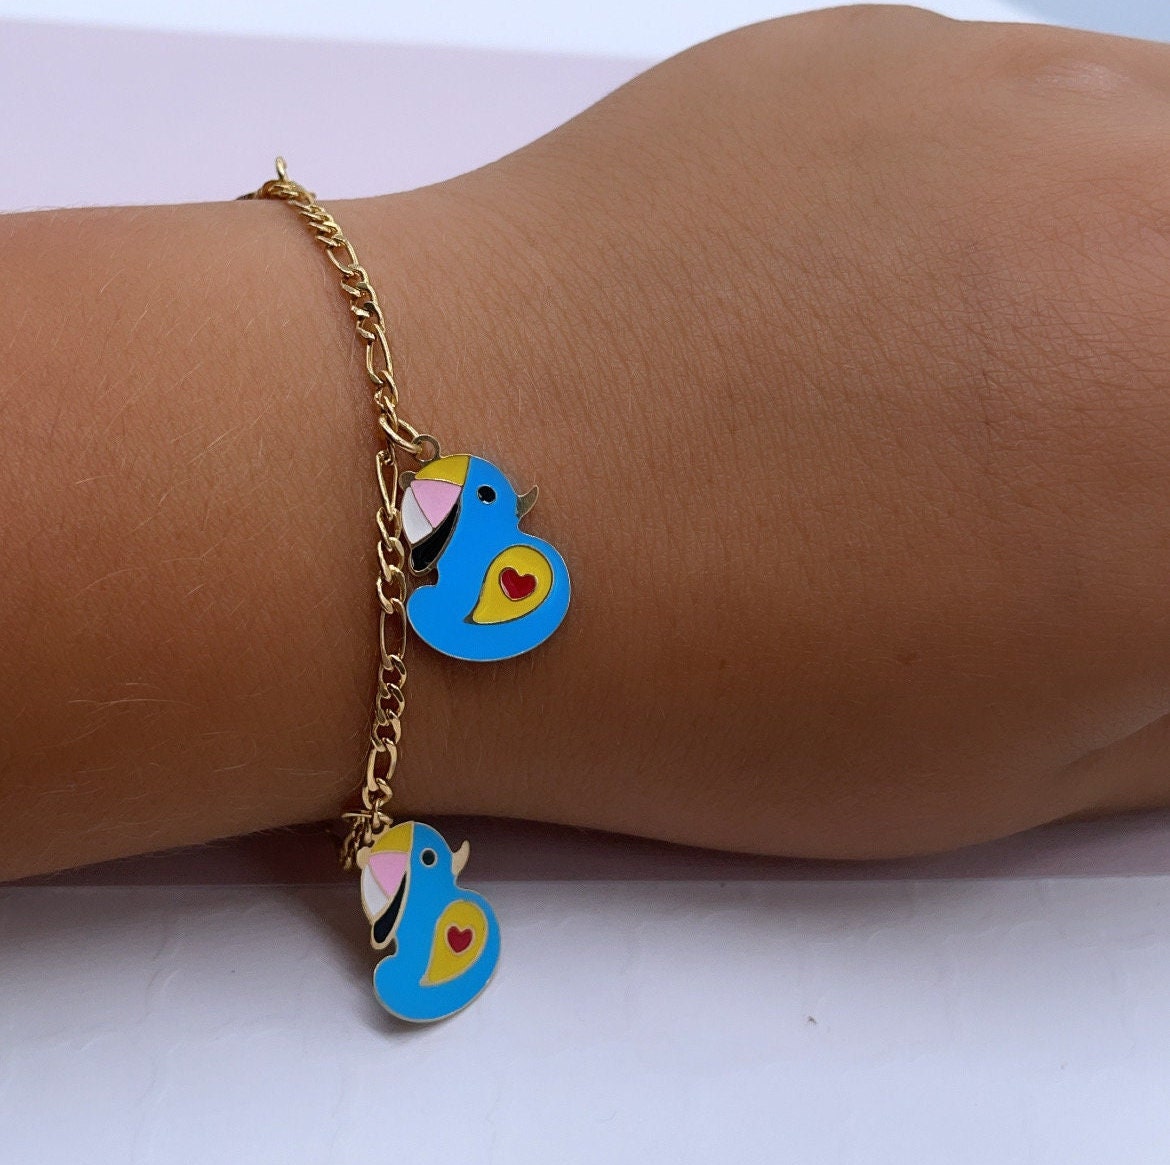 Cute 18k Gold Layered Children’s Colorful Charm Bracelet, Fish, Elephant, Bee,